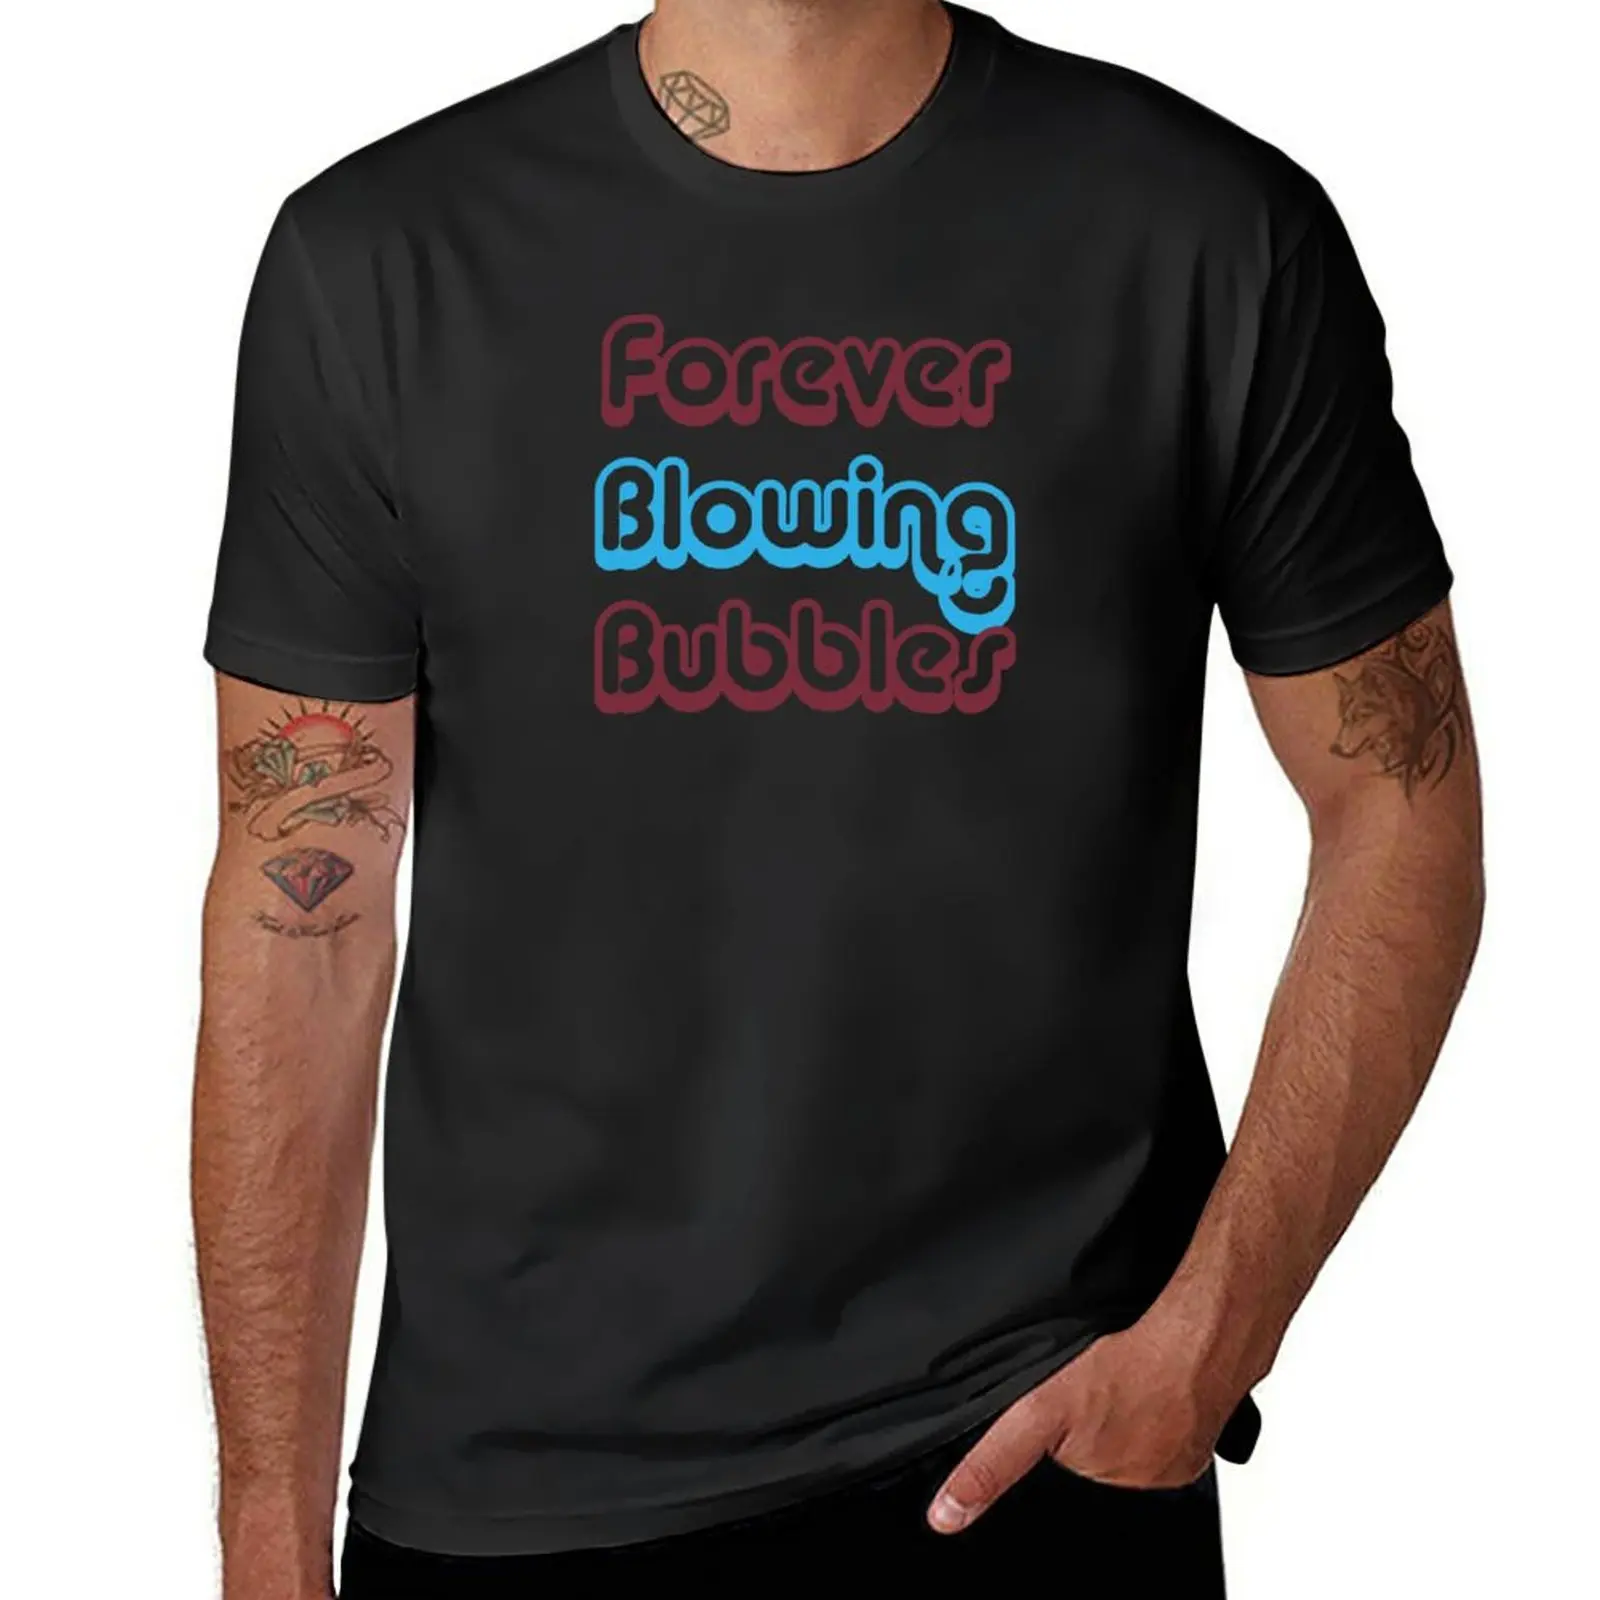 

New Forever Blowing Bubbles T-Shirt Short t-shirt Blouse cute tops summer tops tshirts for men